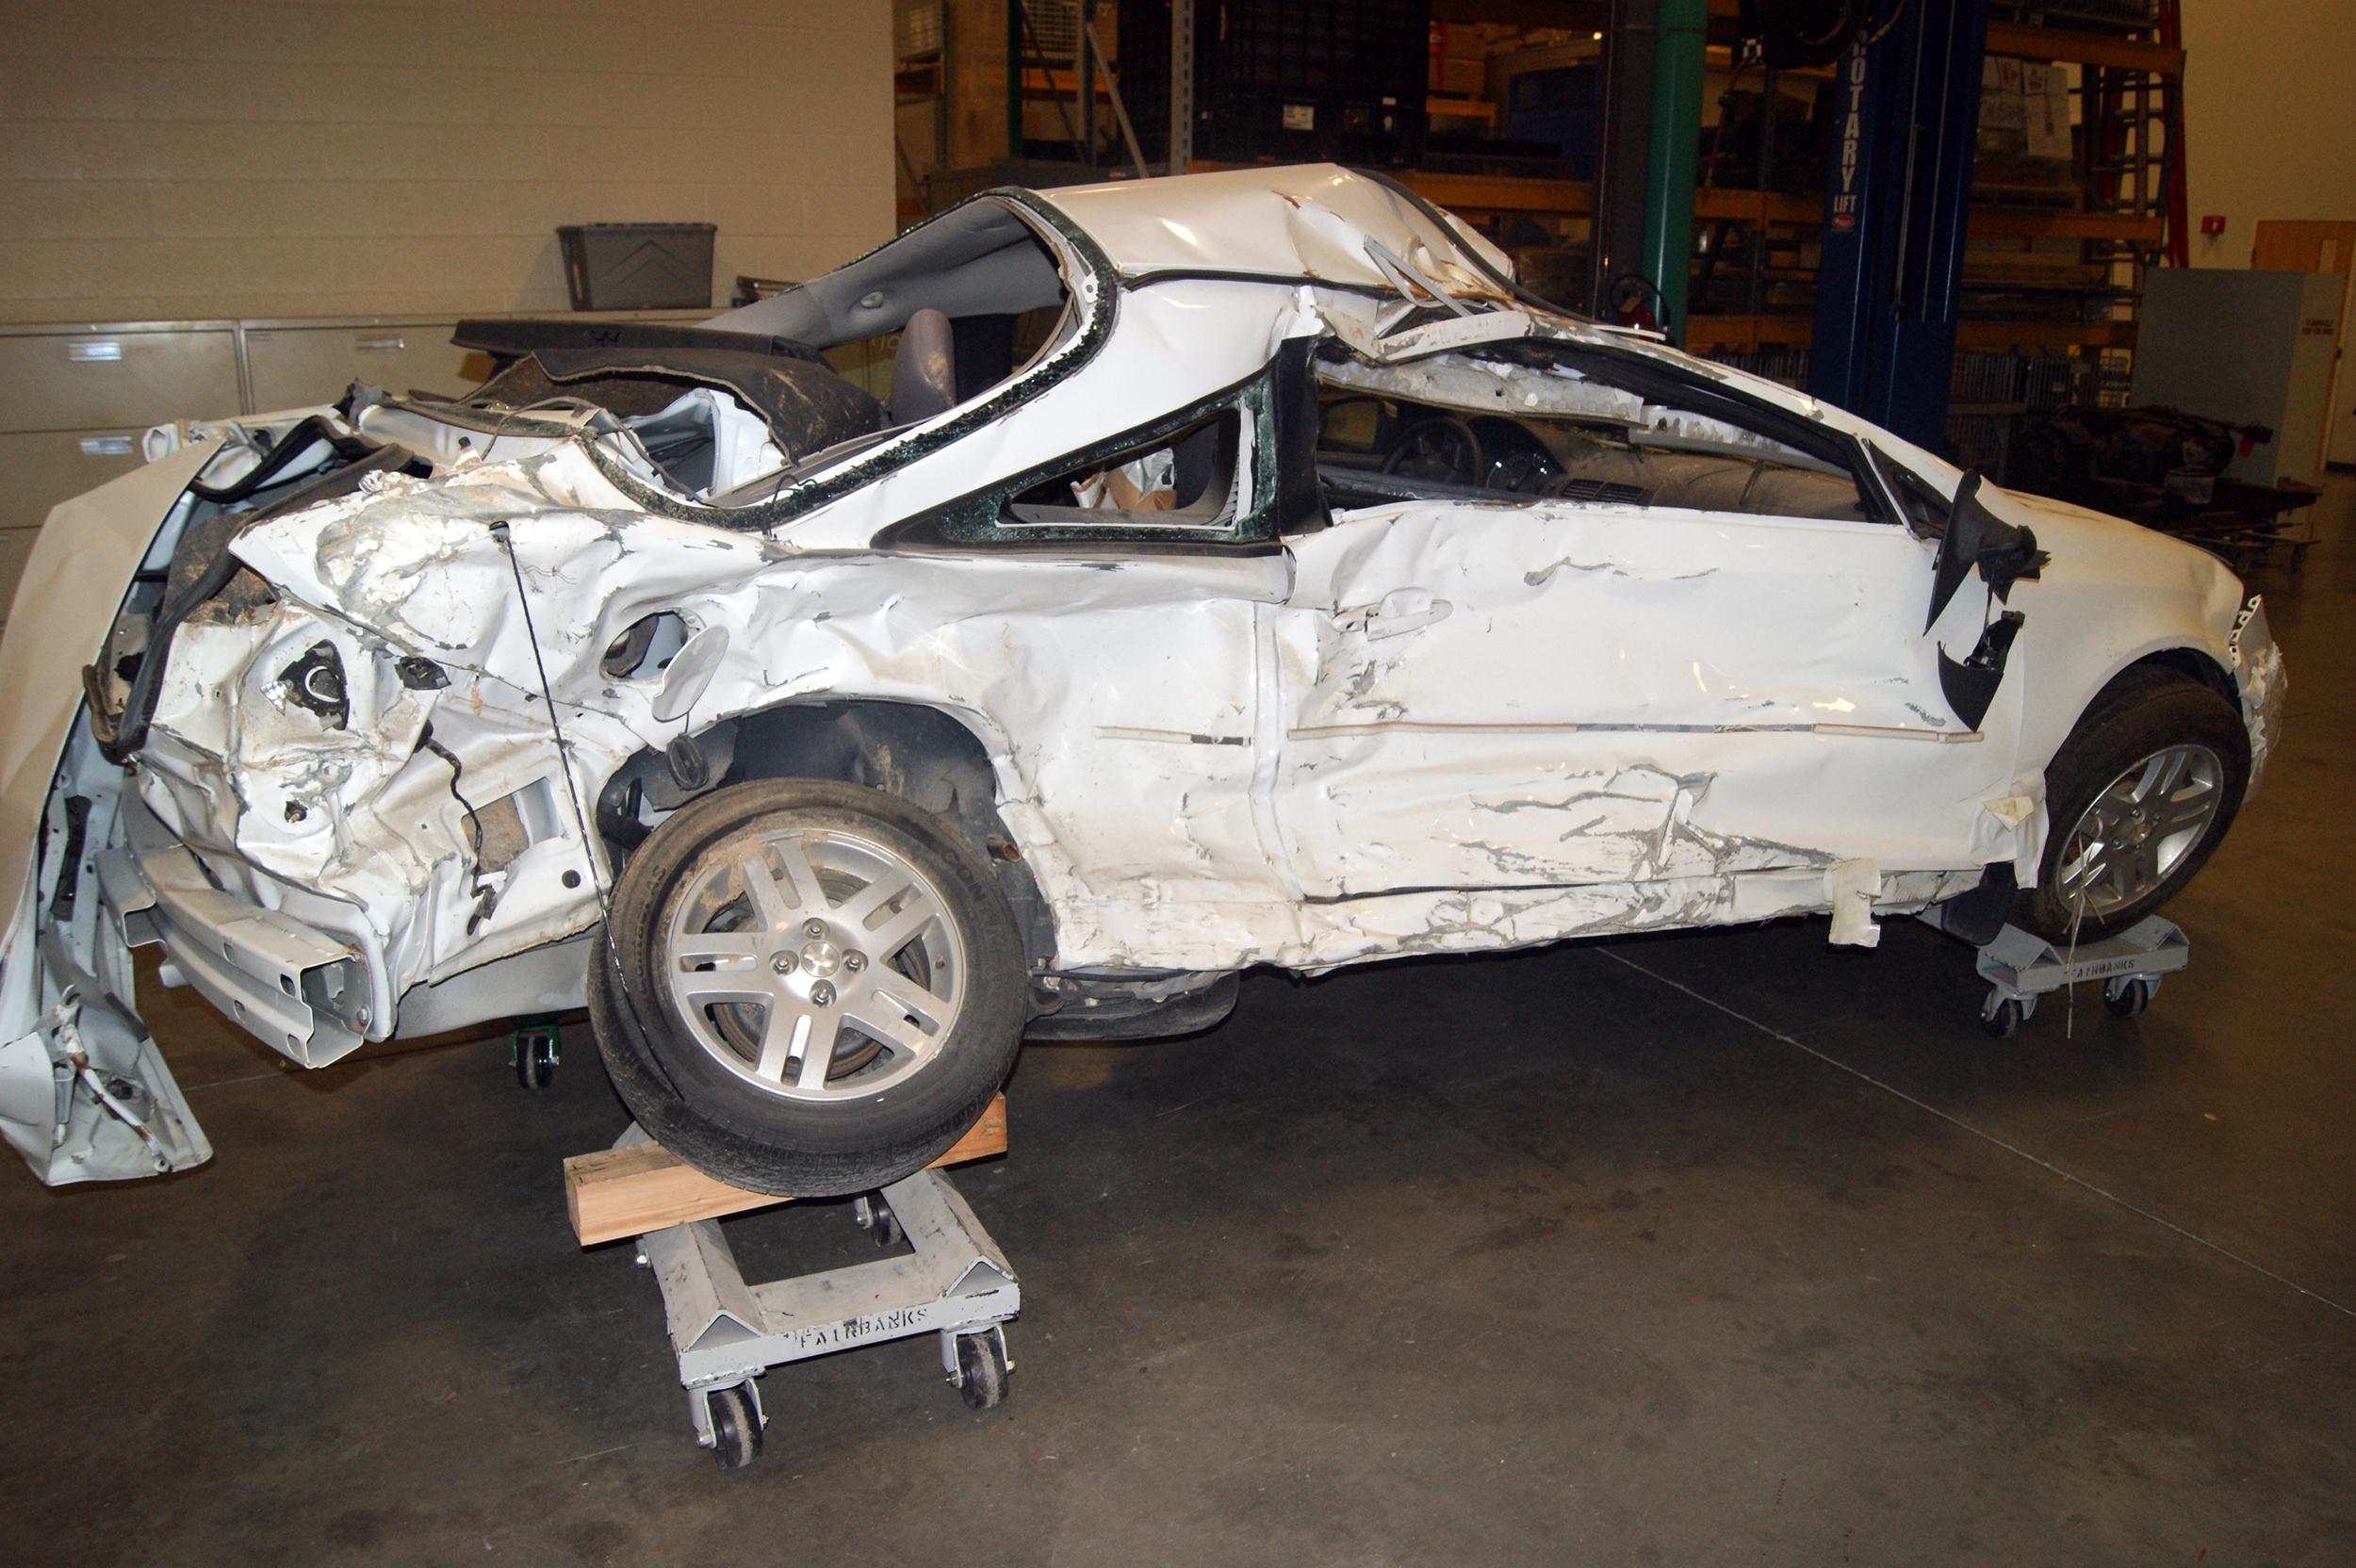 Brooke Melton was killed in this Chevrolet Cobalt in 2010 because of a defective ignition installed by GM.